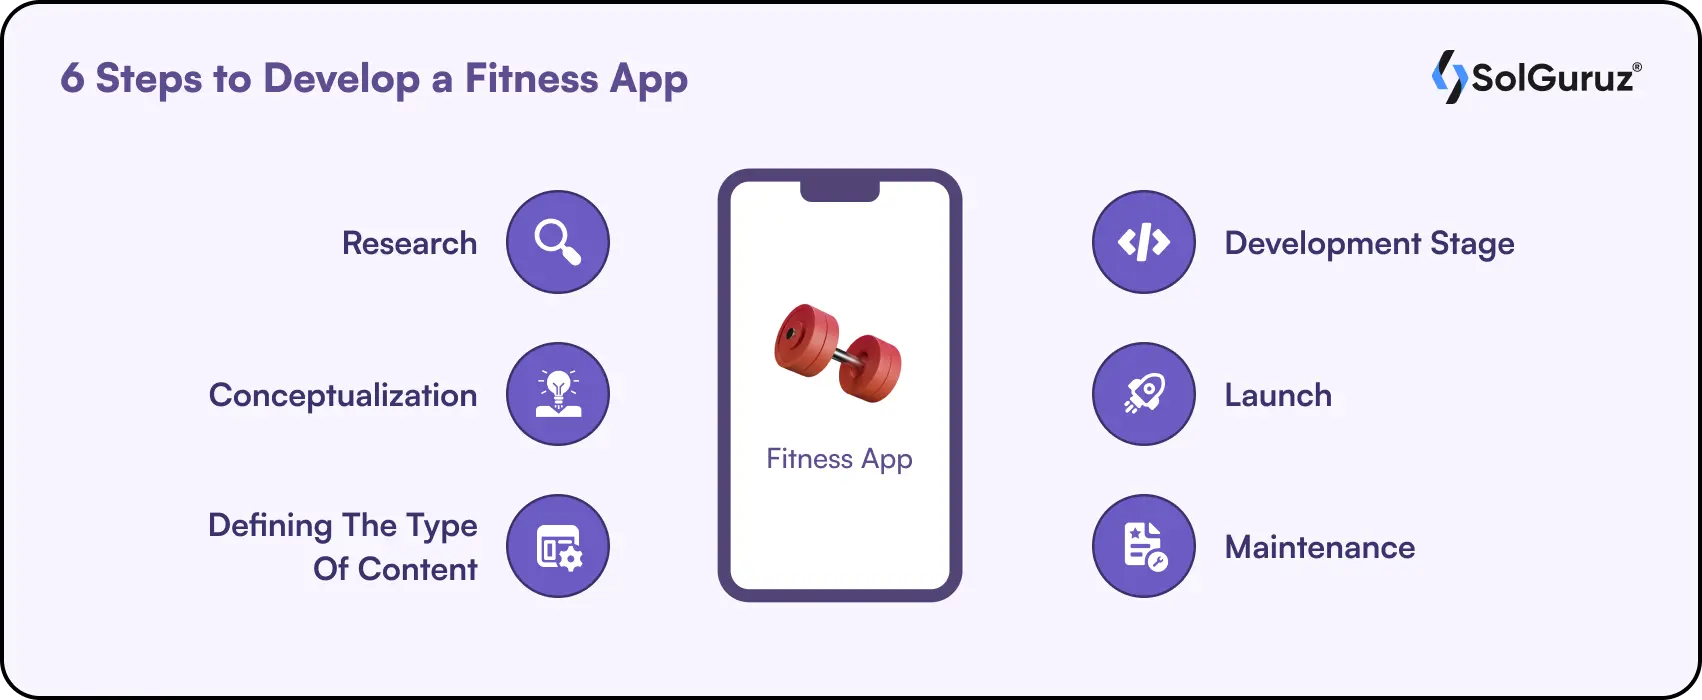 6 Steps to Develop a Fitness App